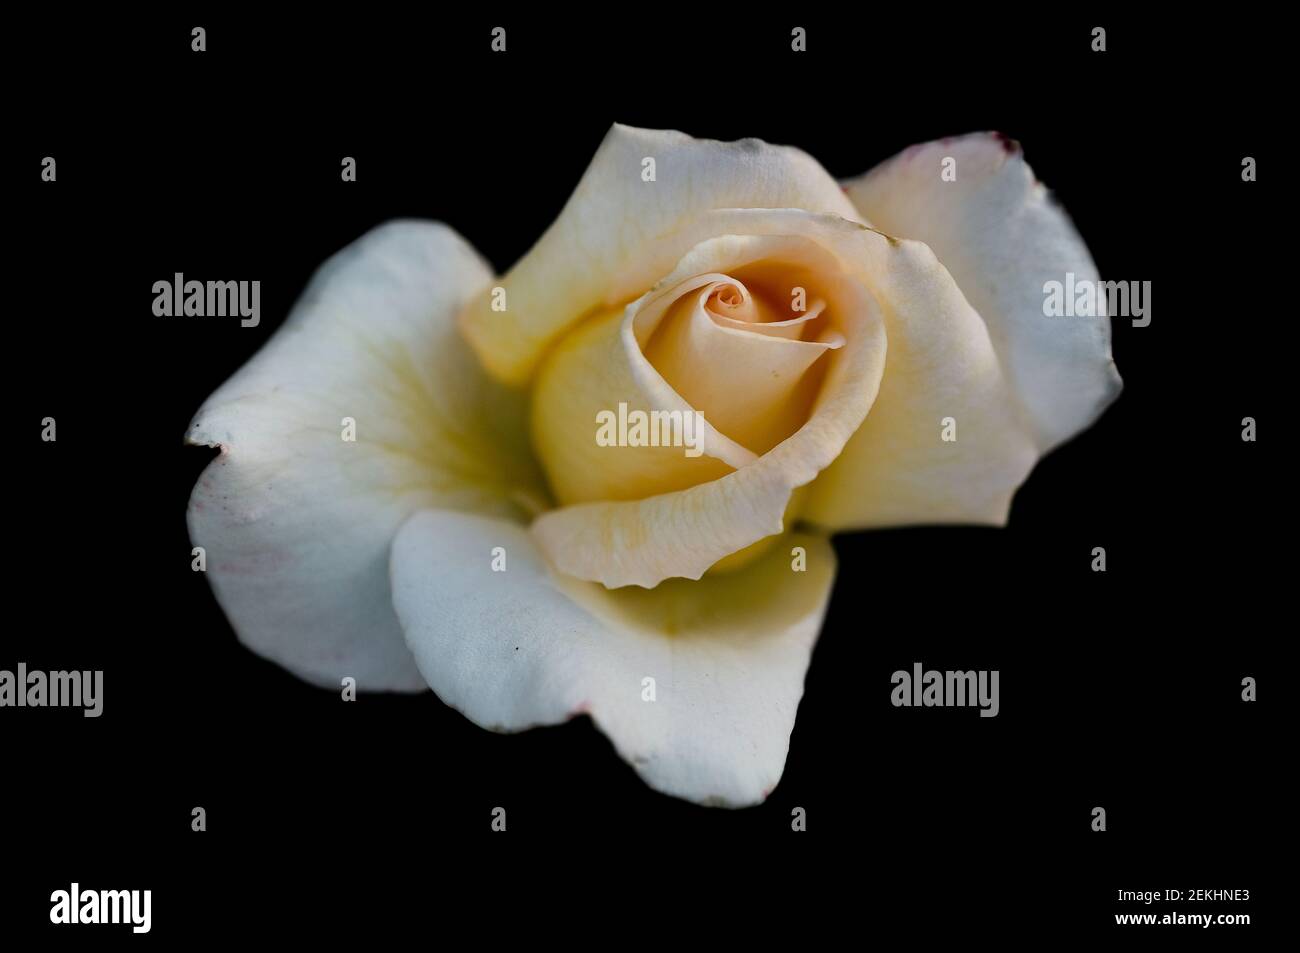 White and yellow rose against black background Stock Photo